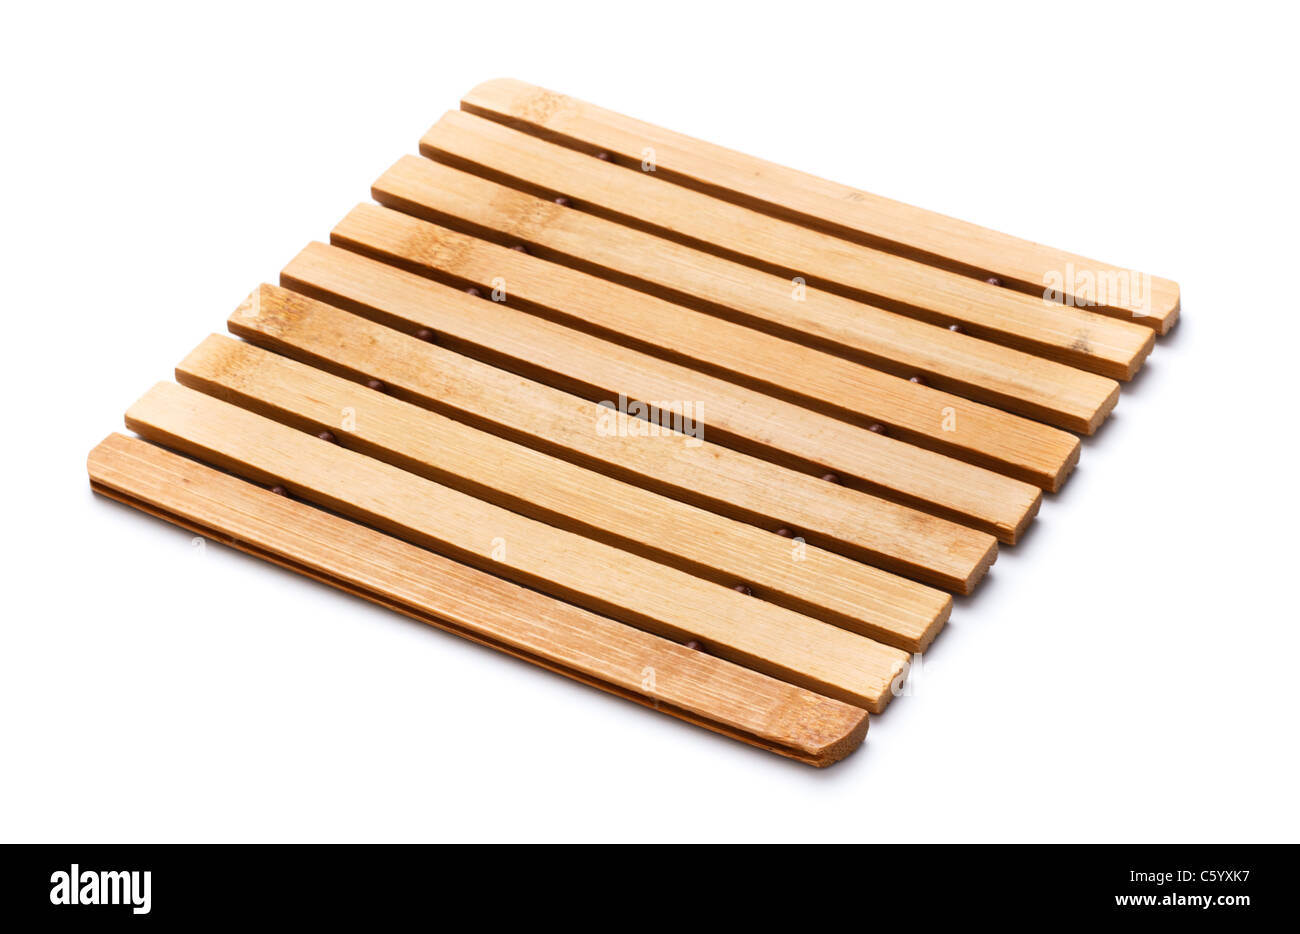 square, wooden trivet isolated on white background Stock Photo